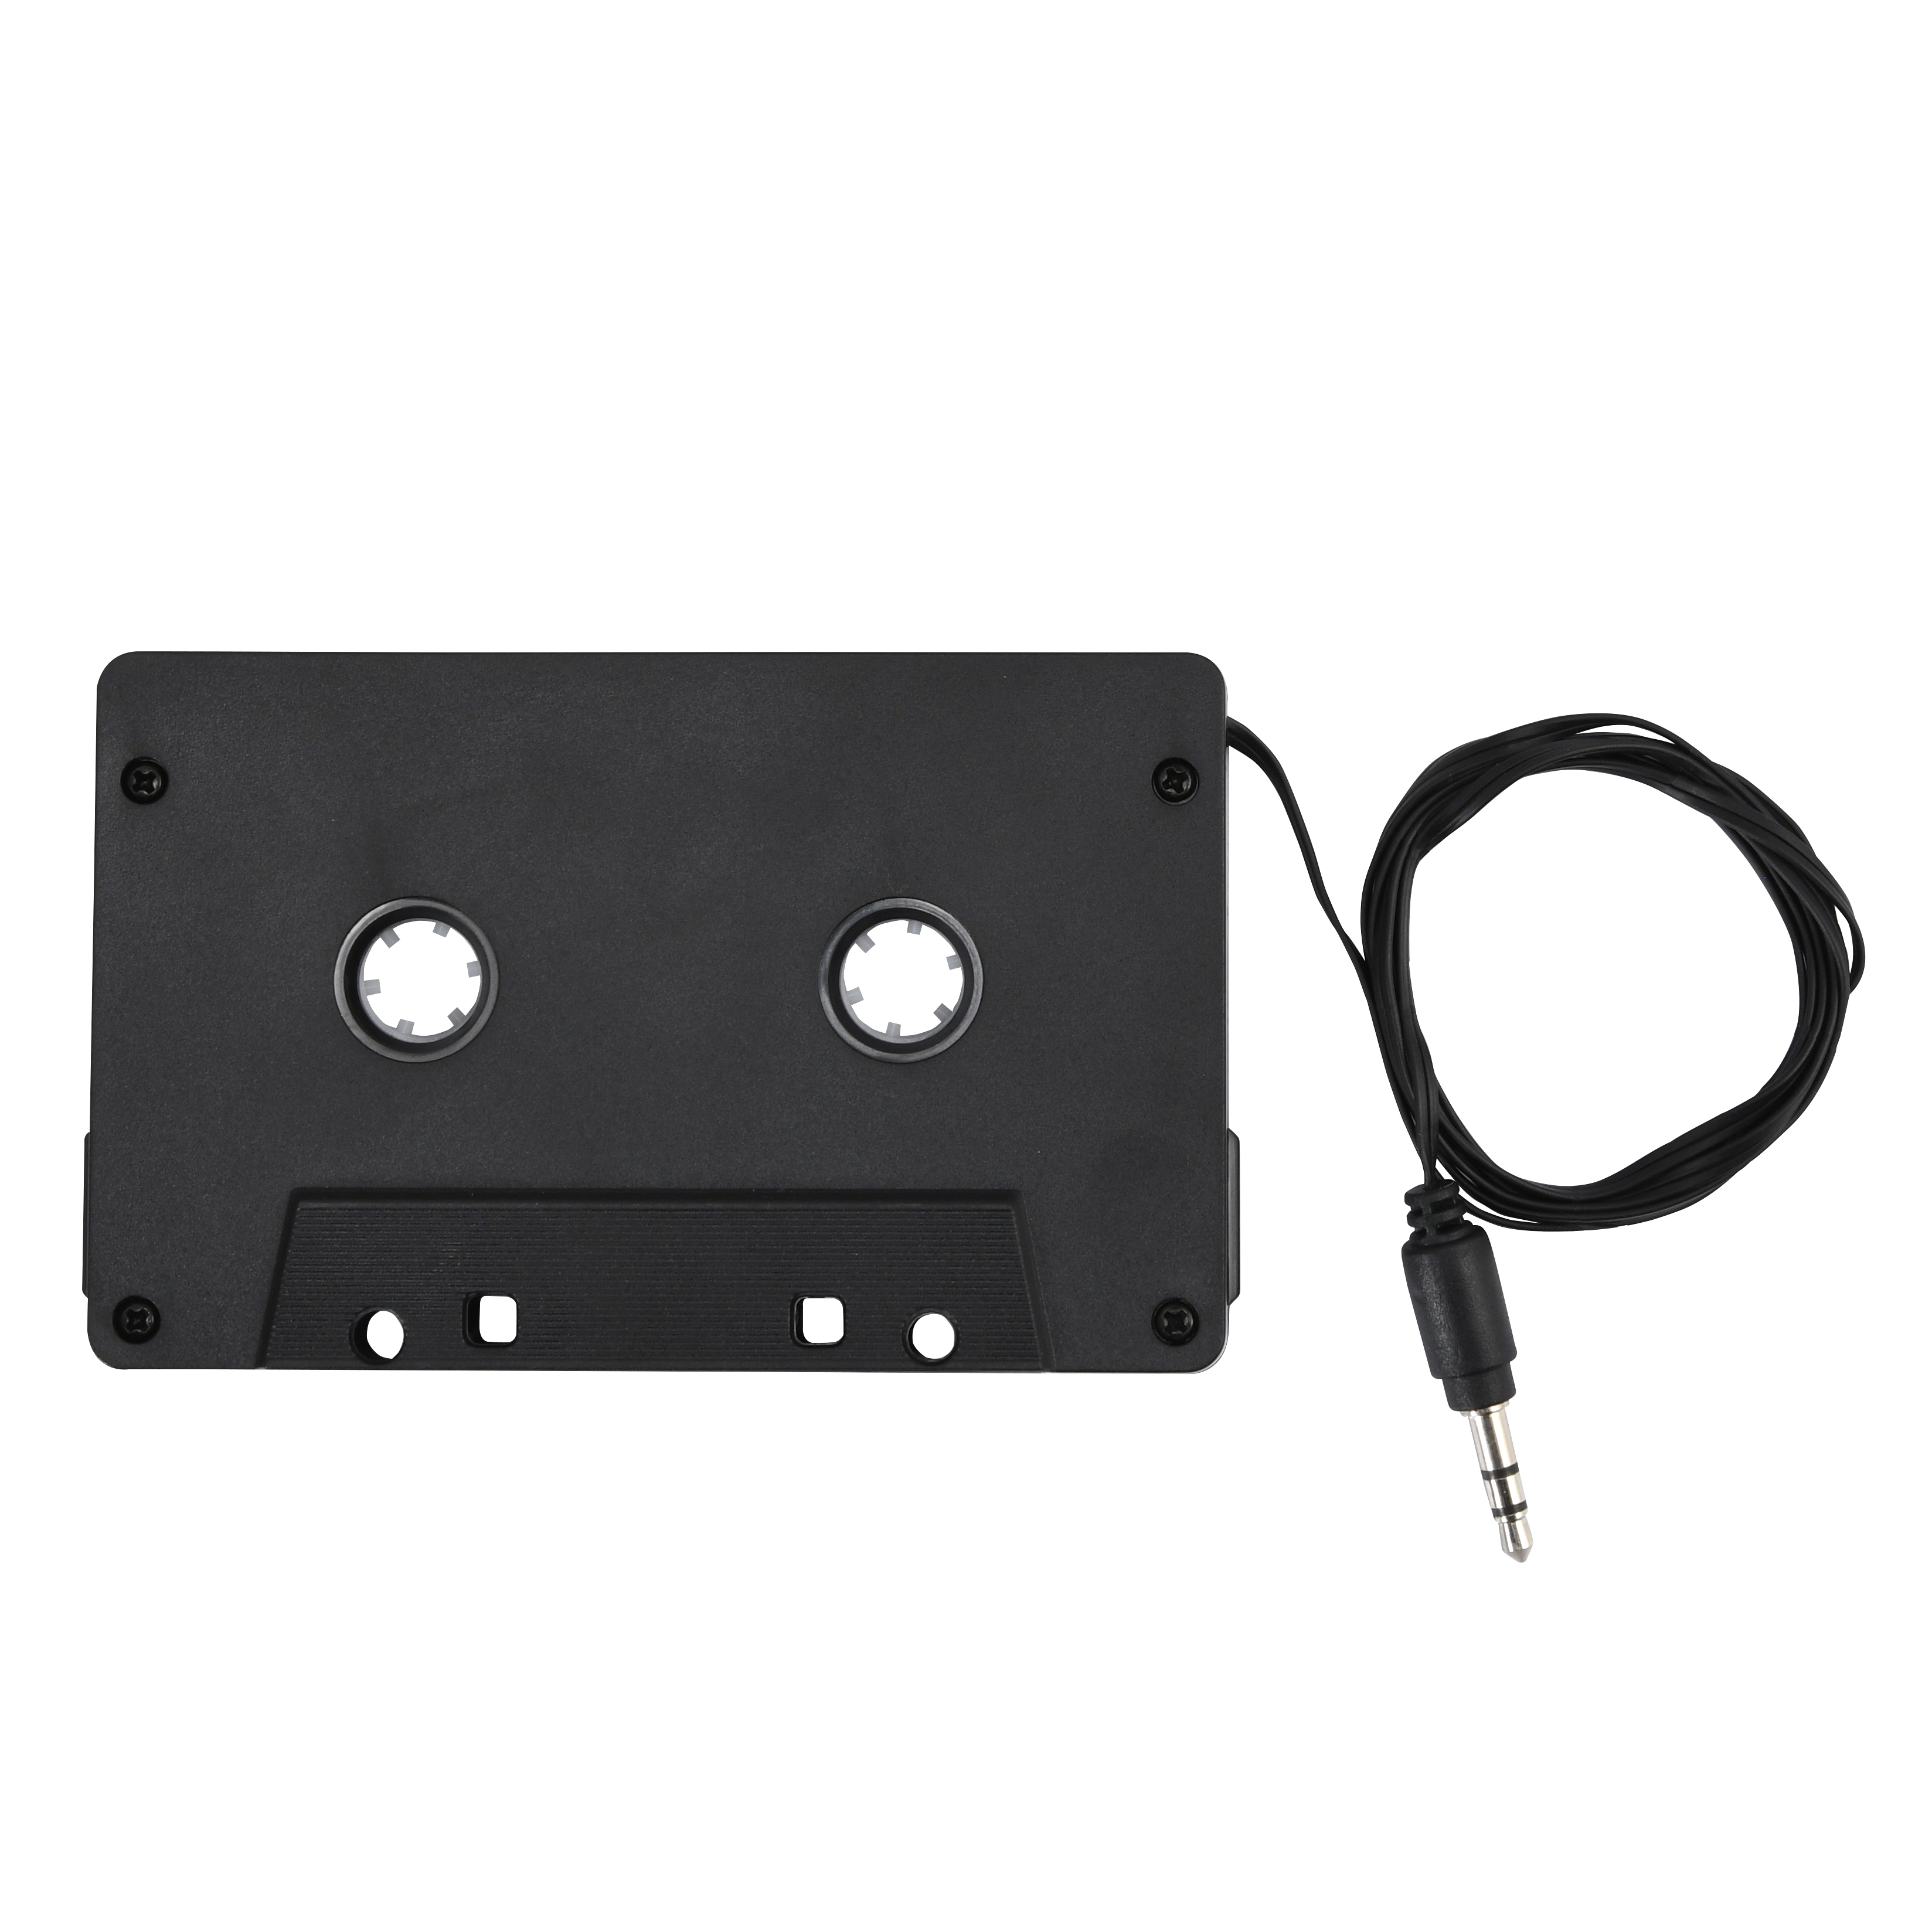 Onn Cassette Adapter - Turn Any Tapedeck Stereo System Into a Digital Media Player - image 2 of 5